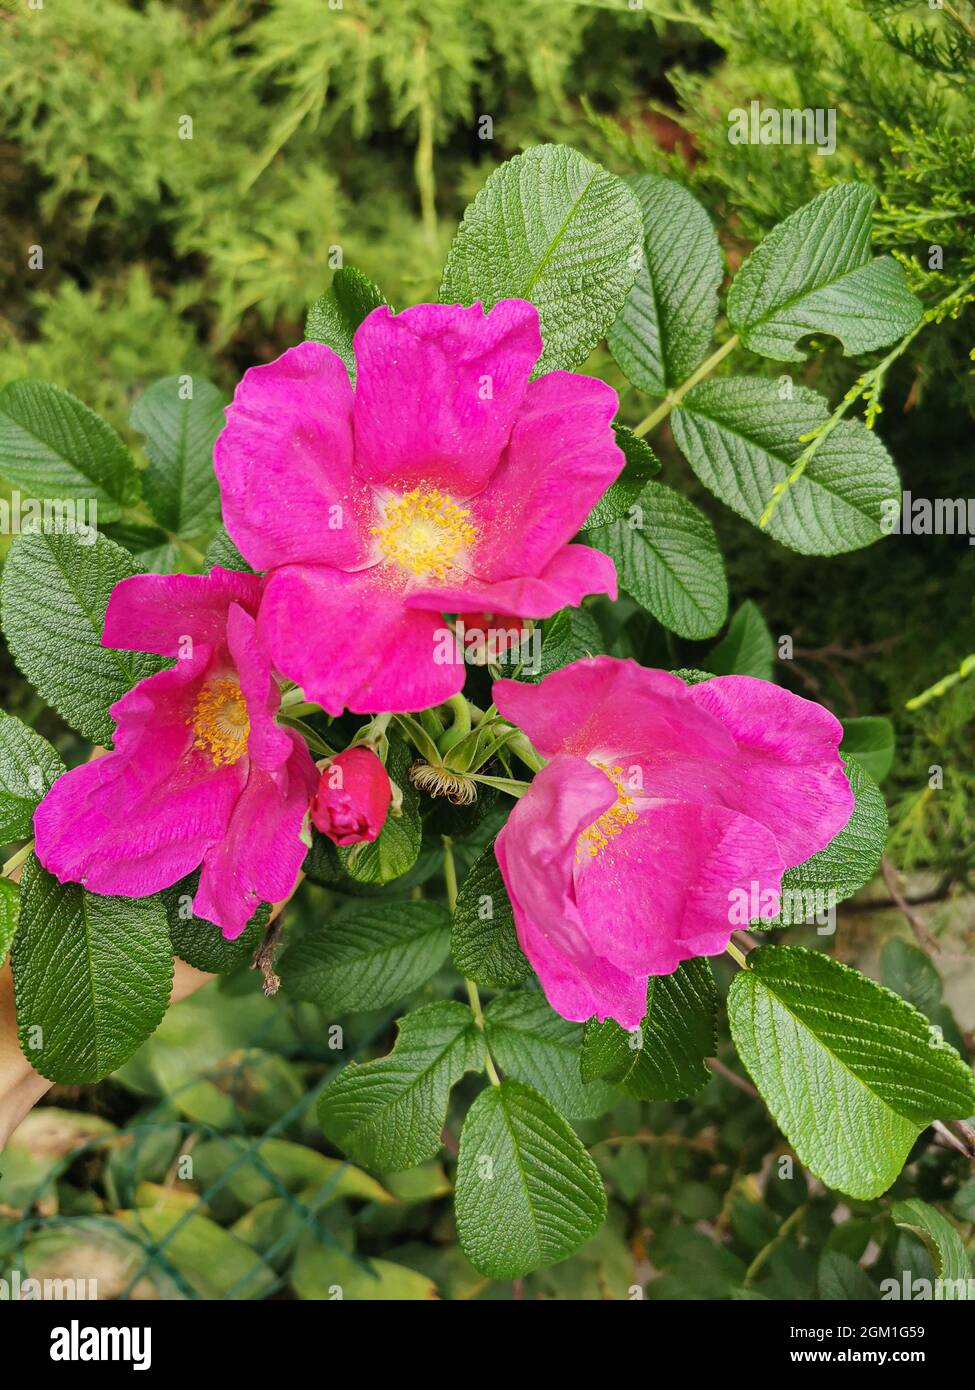 Wild rose. A colorful pink rose flower garden in full bloom on a background of green leaves Stock Photo